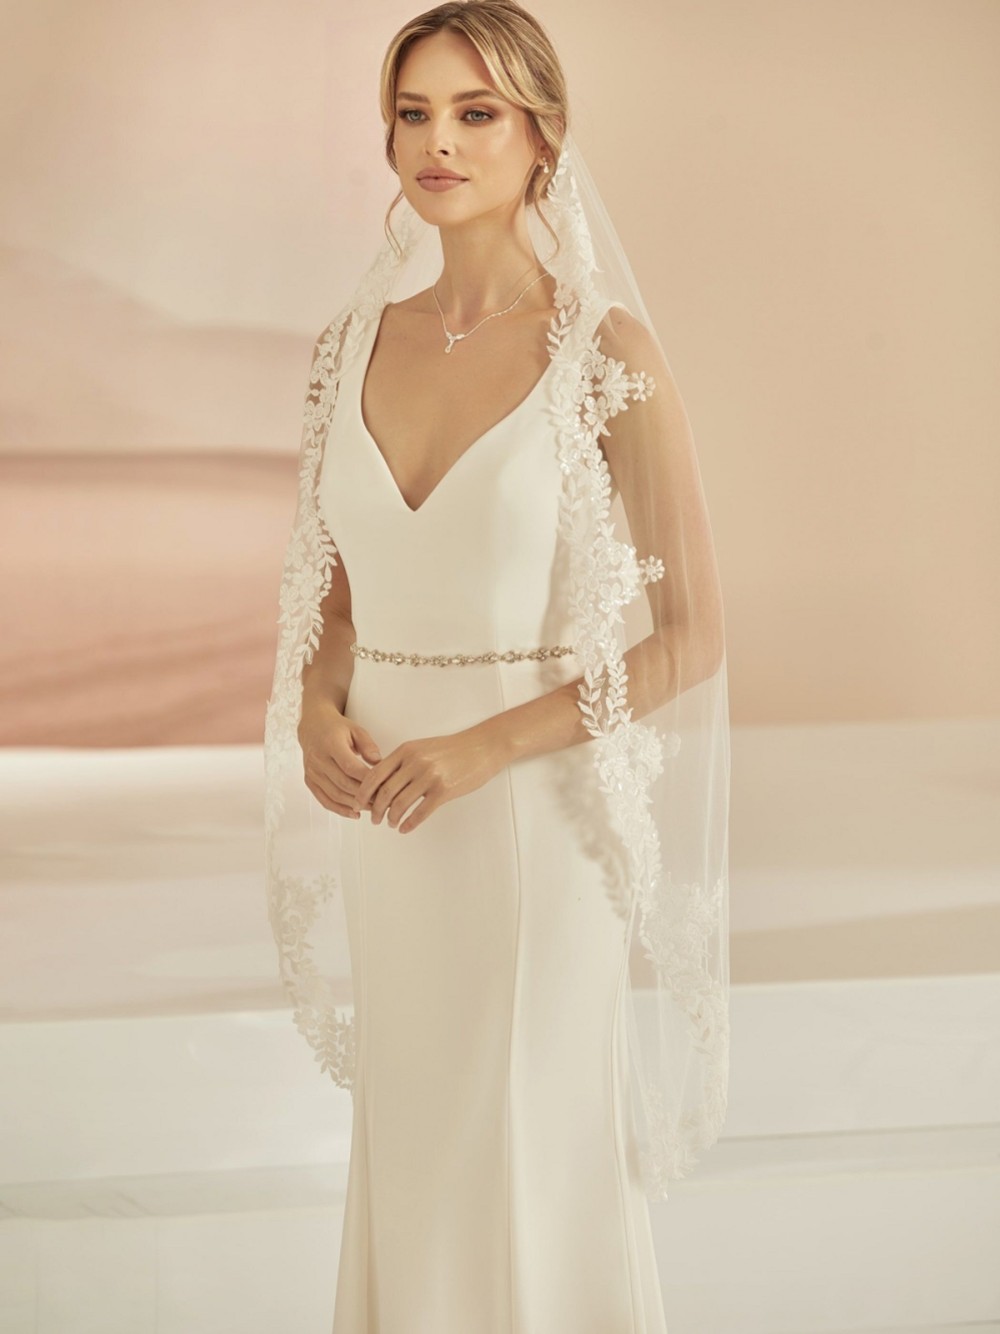 Photograph: Bianco Ivory Single Tier Sequinned Floral Lace Fingertip Veil S412